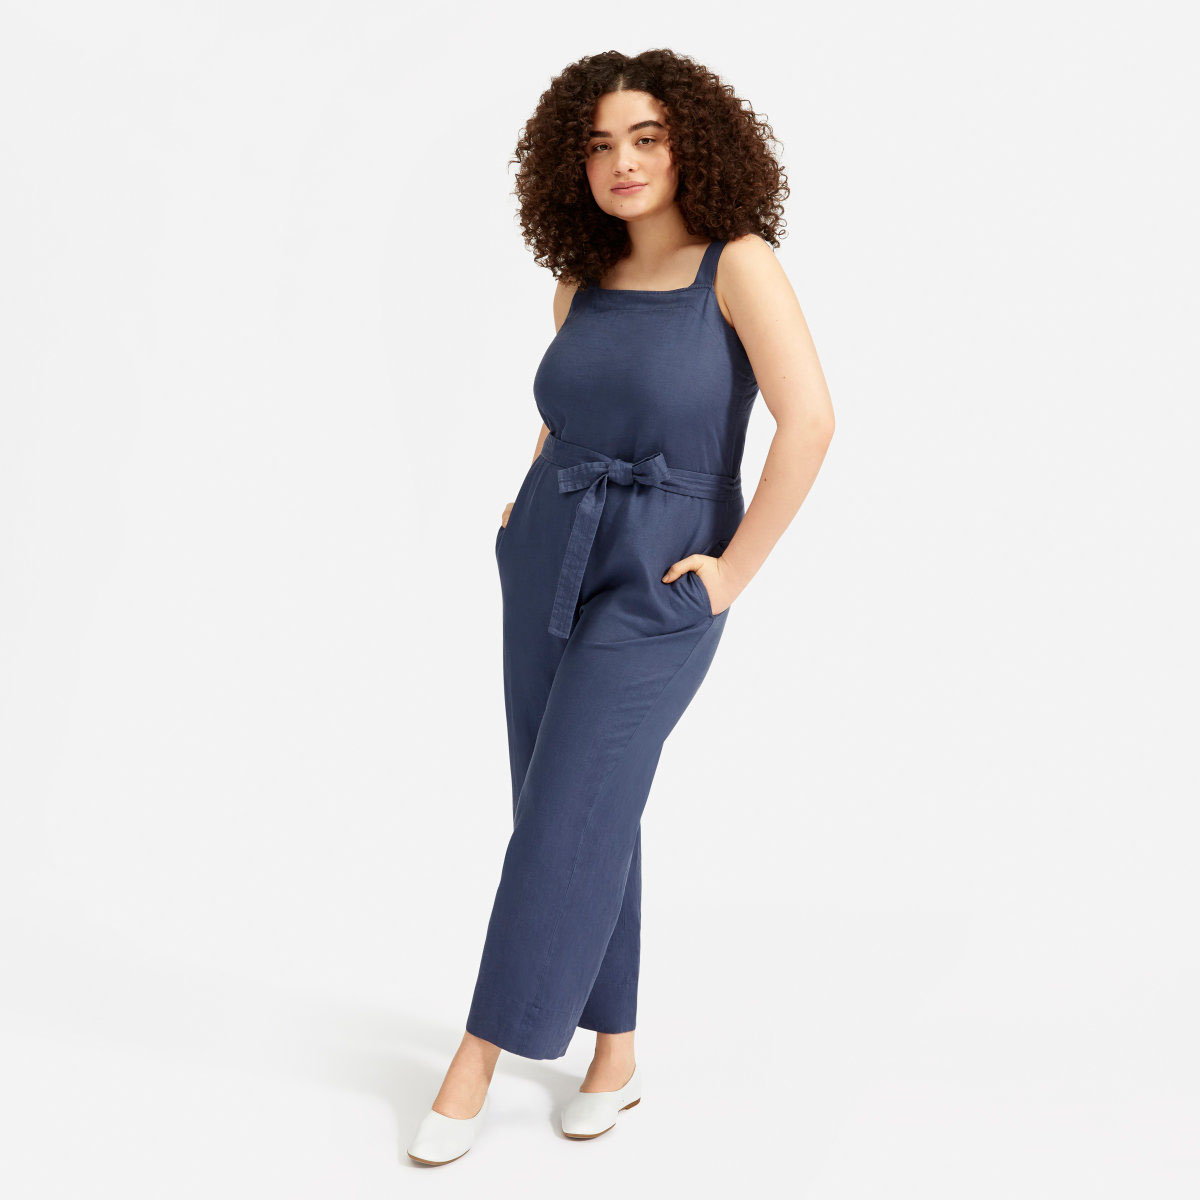 Everlane's New Jumpsuits Might Be the Comfiest Ones Ever